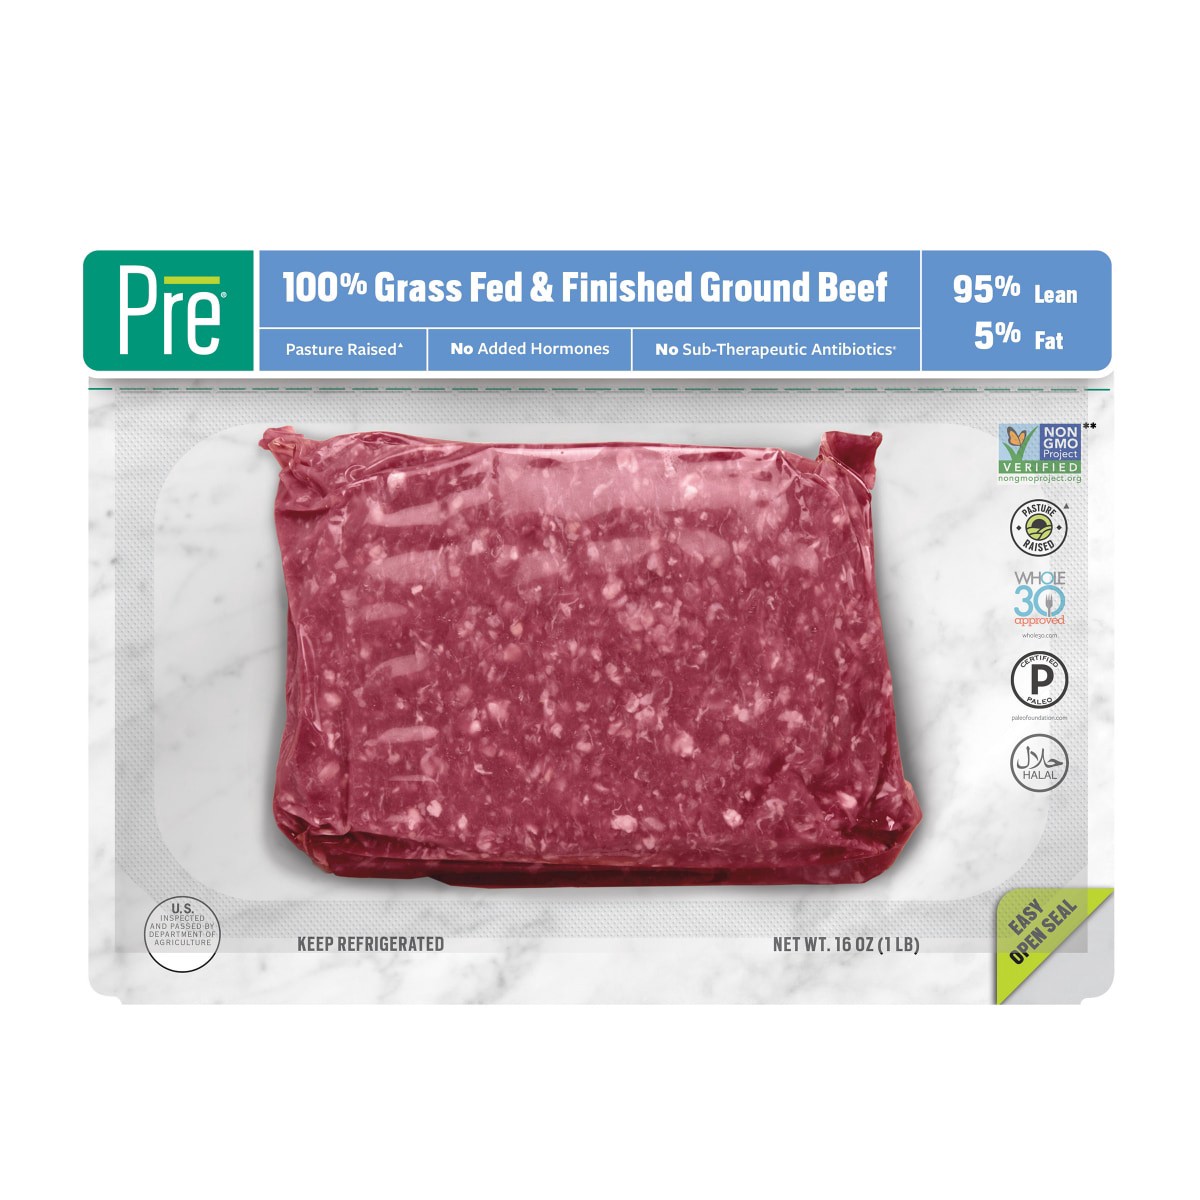 slide 1 of 21, Pre, 95% Lean Ground Beef Grass-Fed, Grass-Finished, and Pasture-Raised, 16 oz